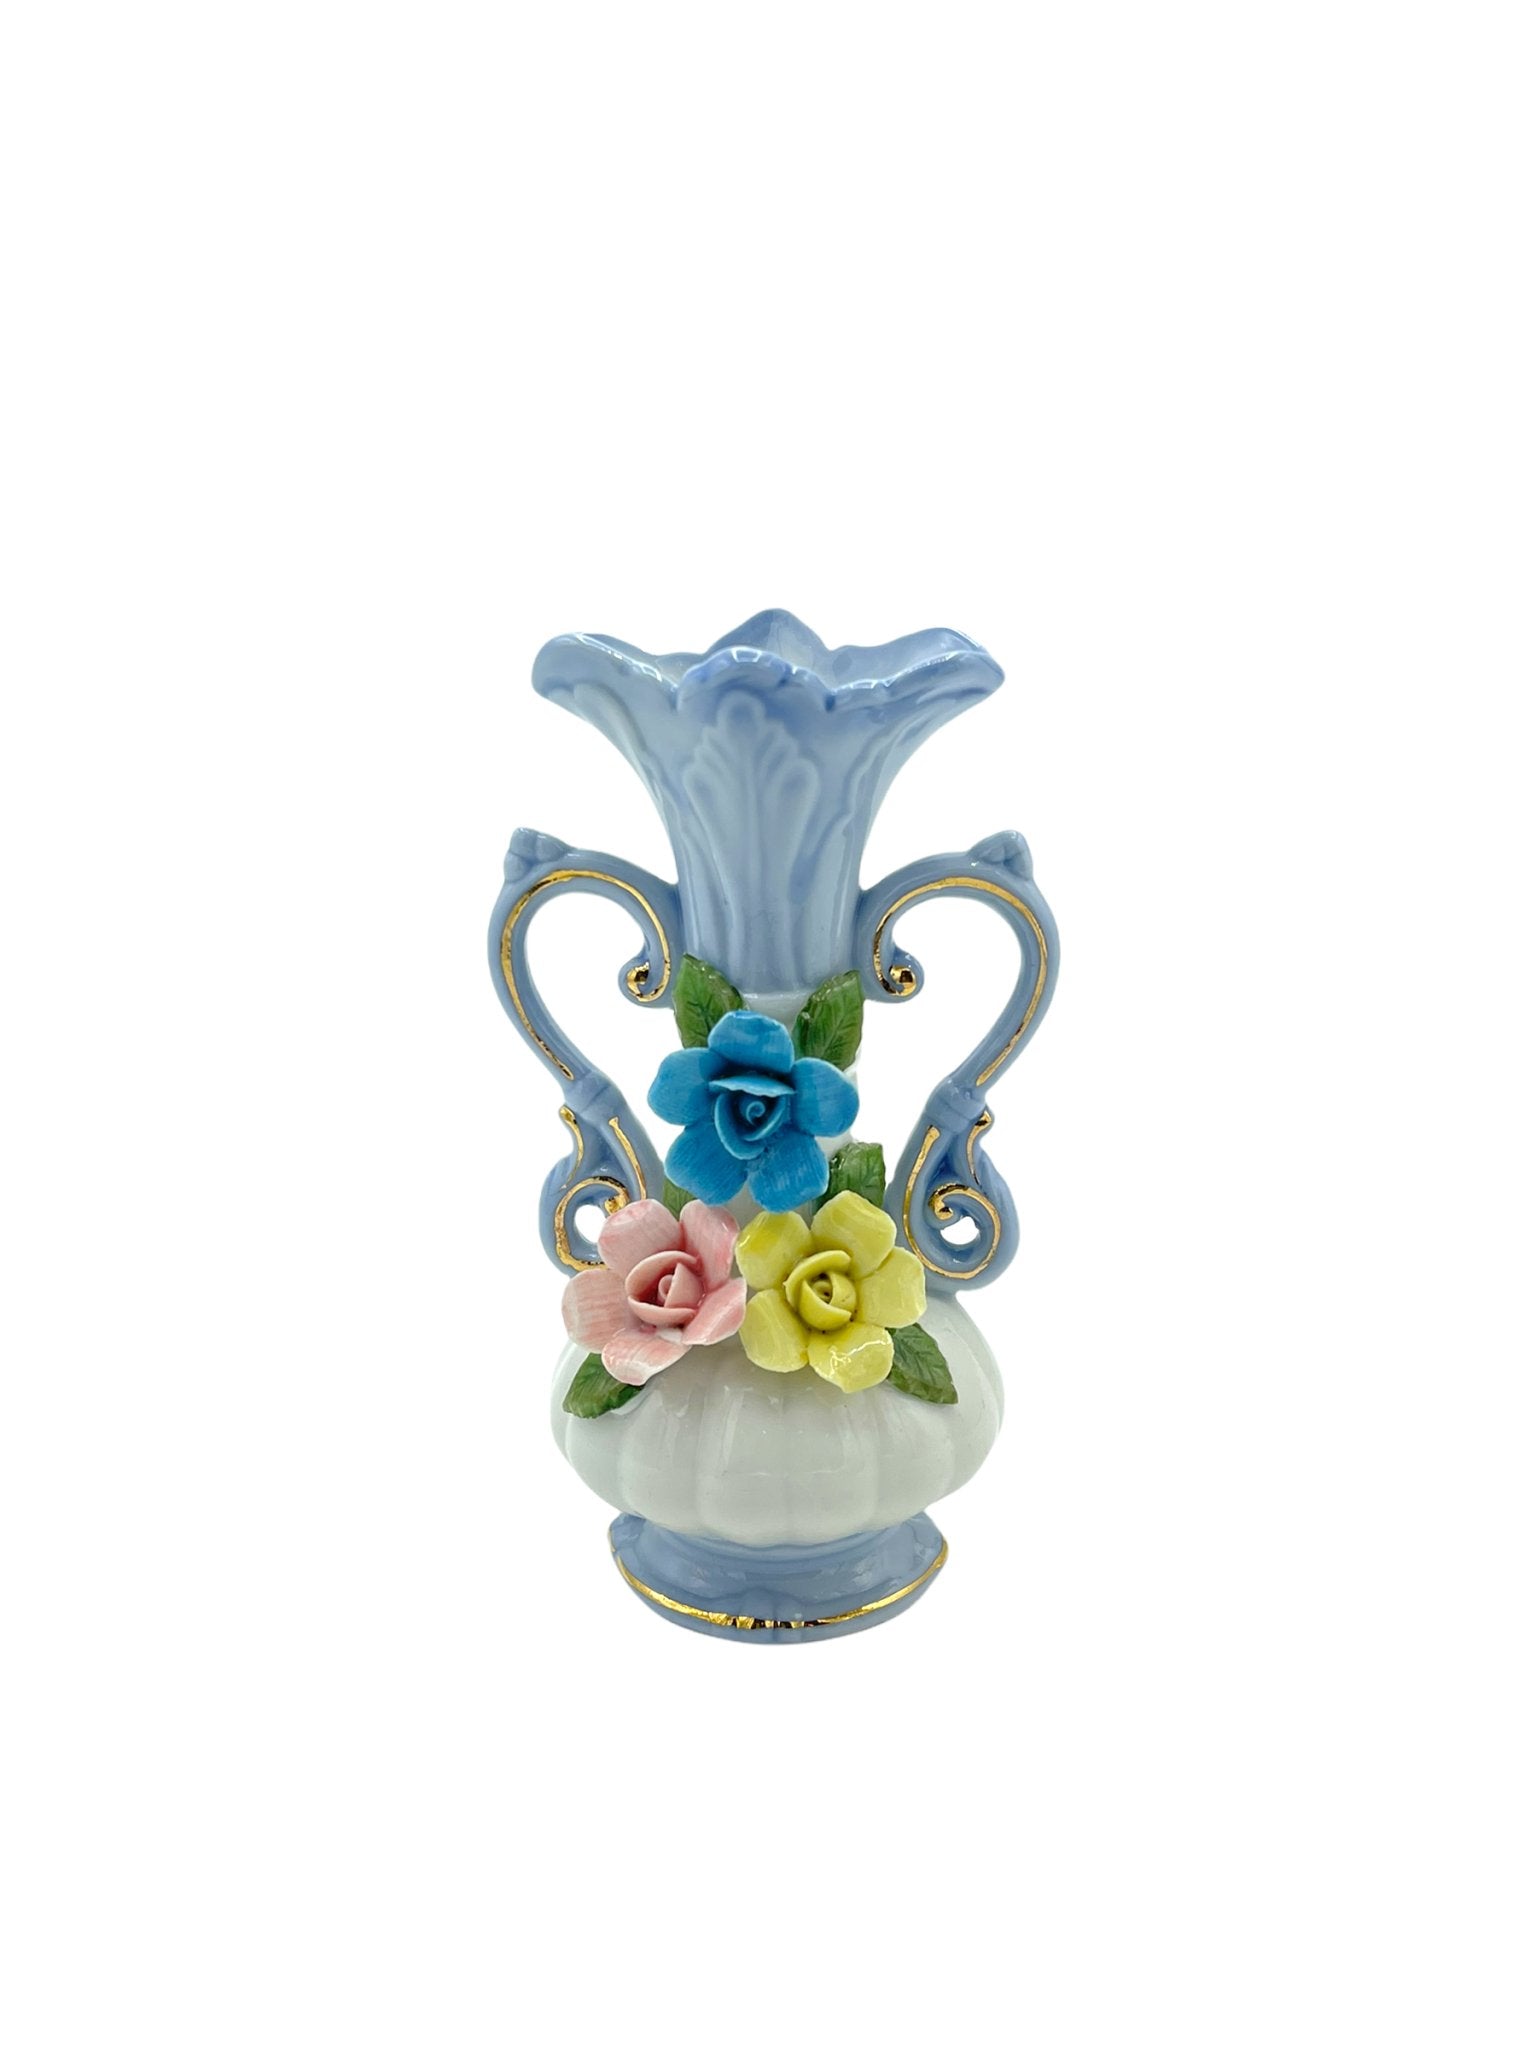 Norcrest Nortake Blue Floral Bud Vase with Three-dimensional 